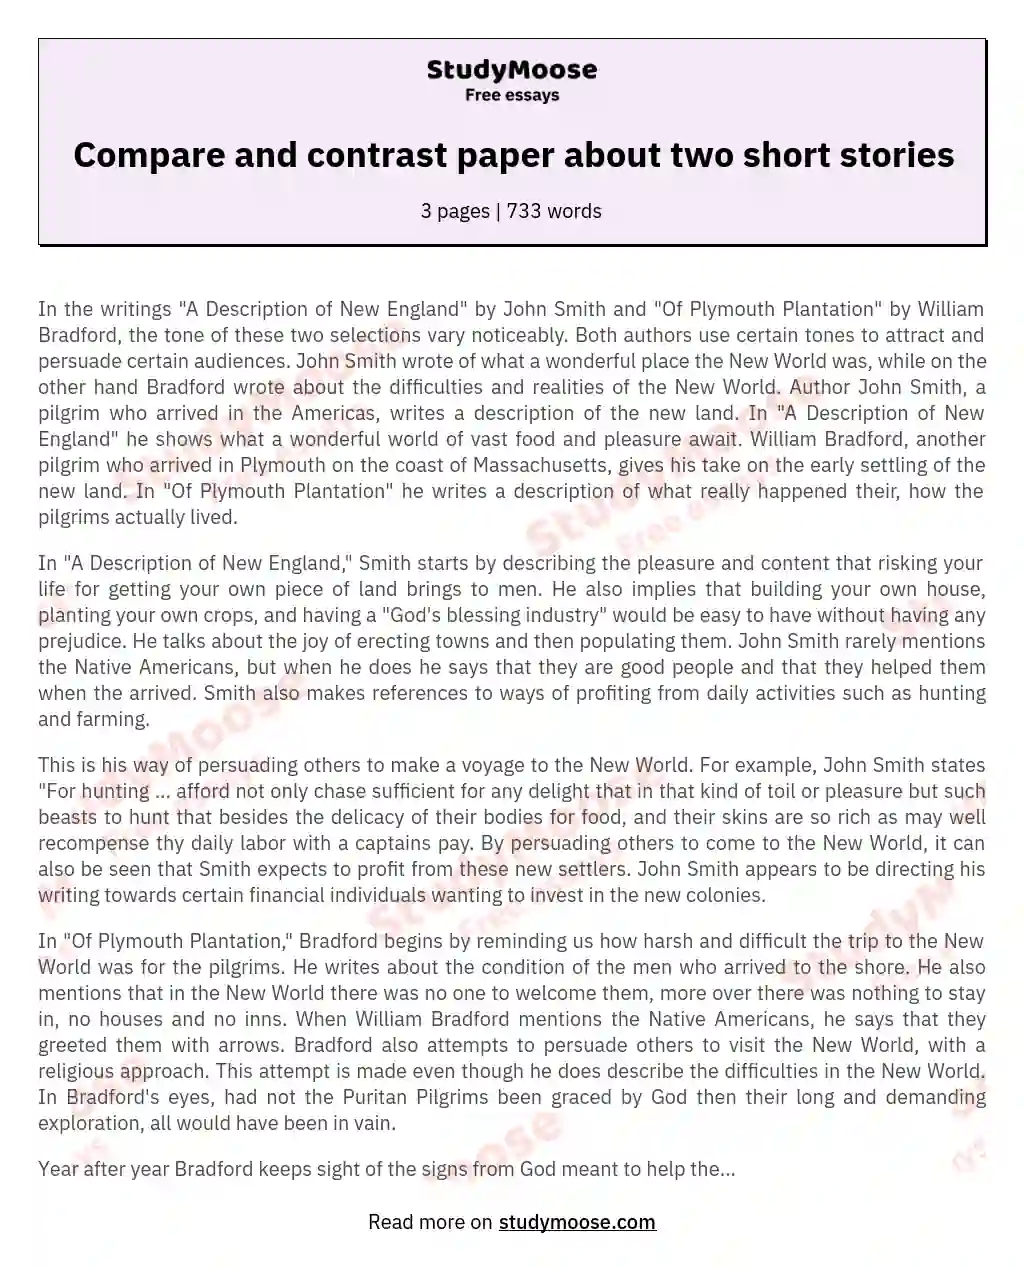 Compare and contrast paper about two short stories essay